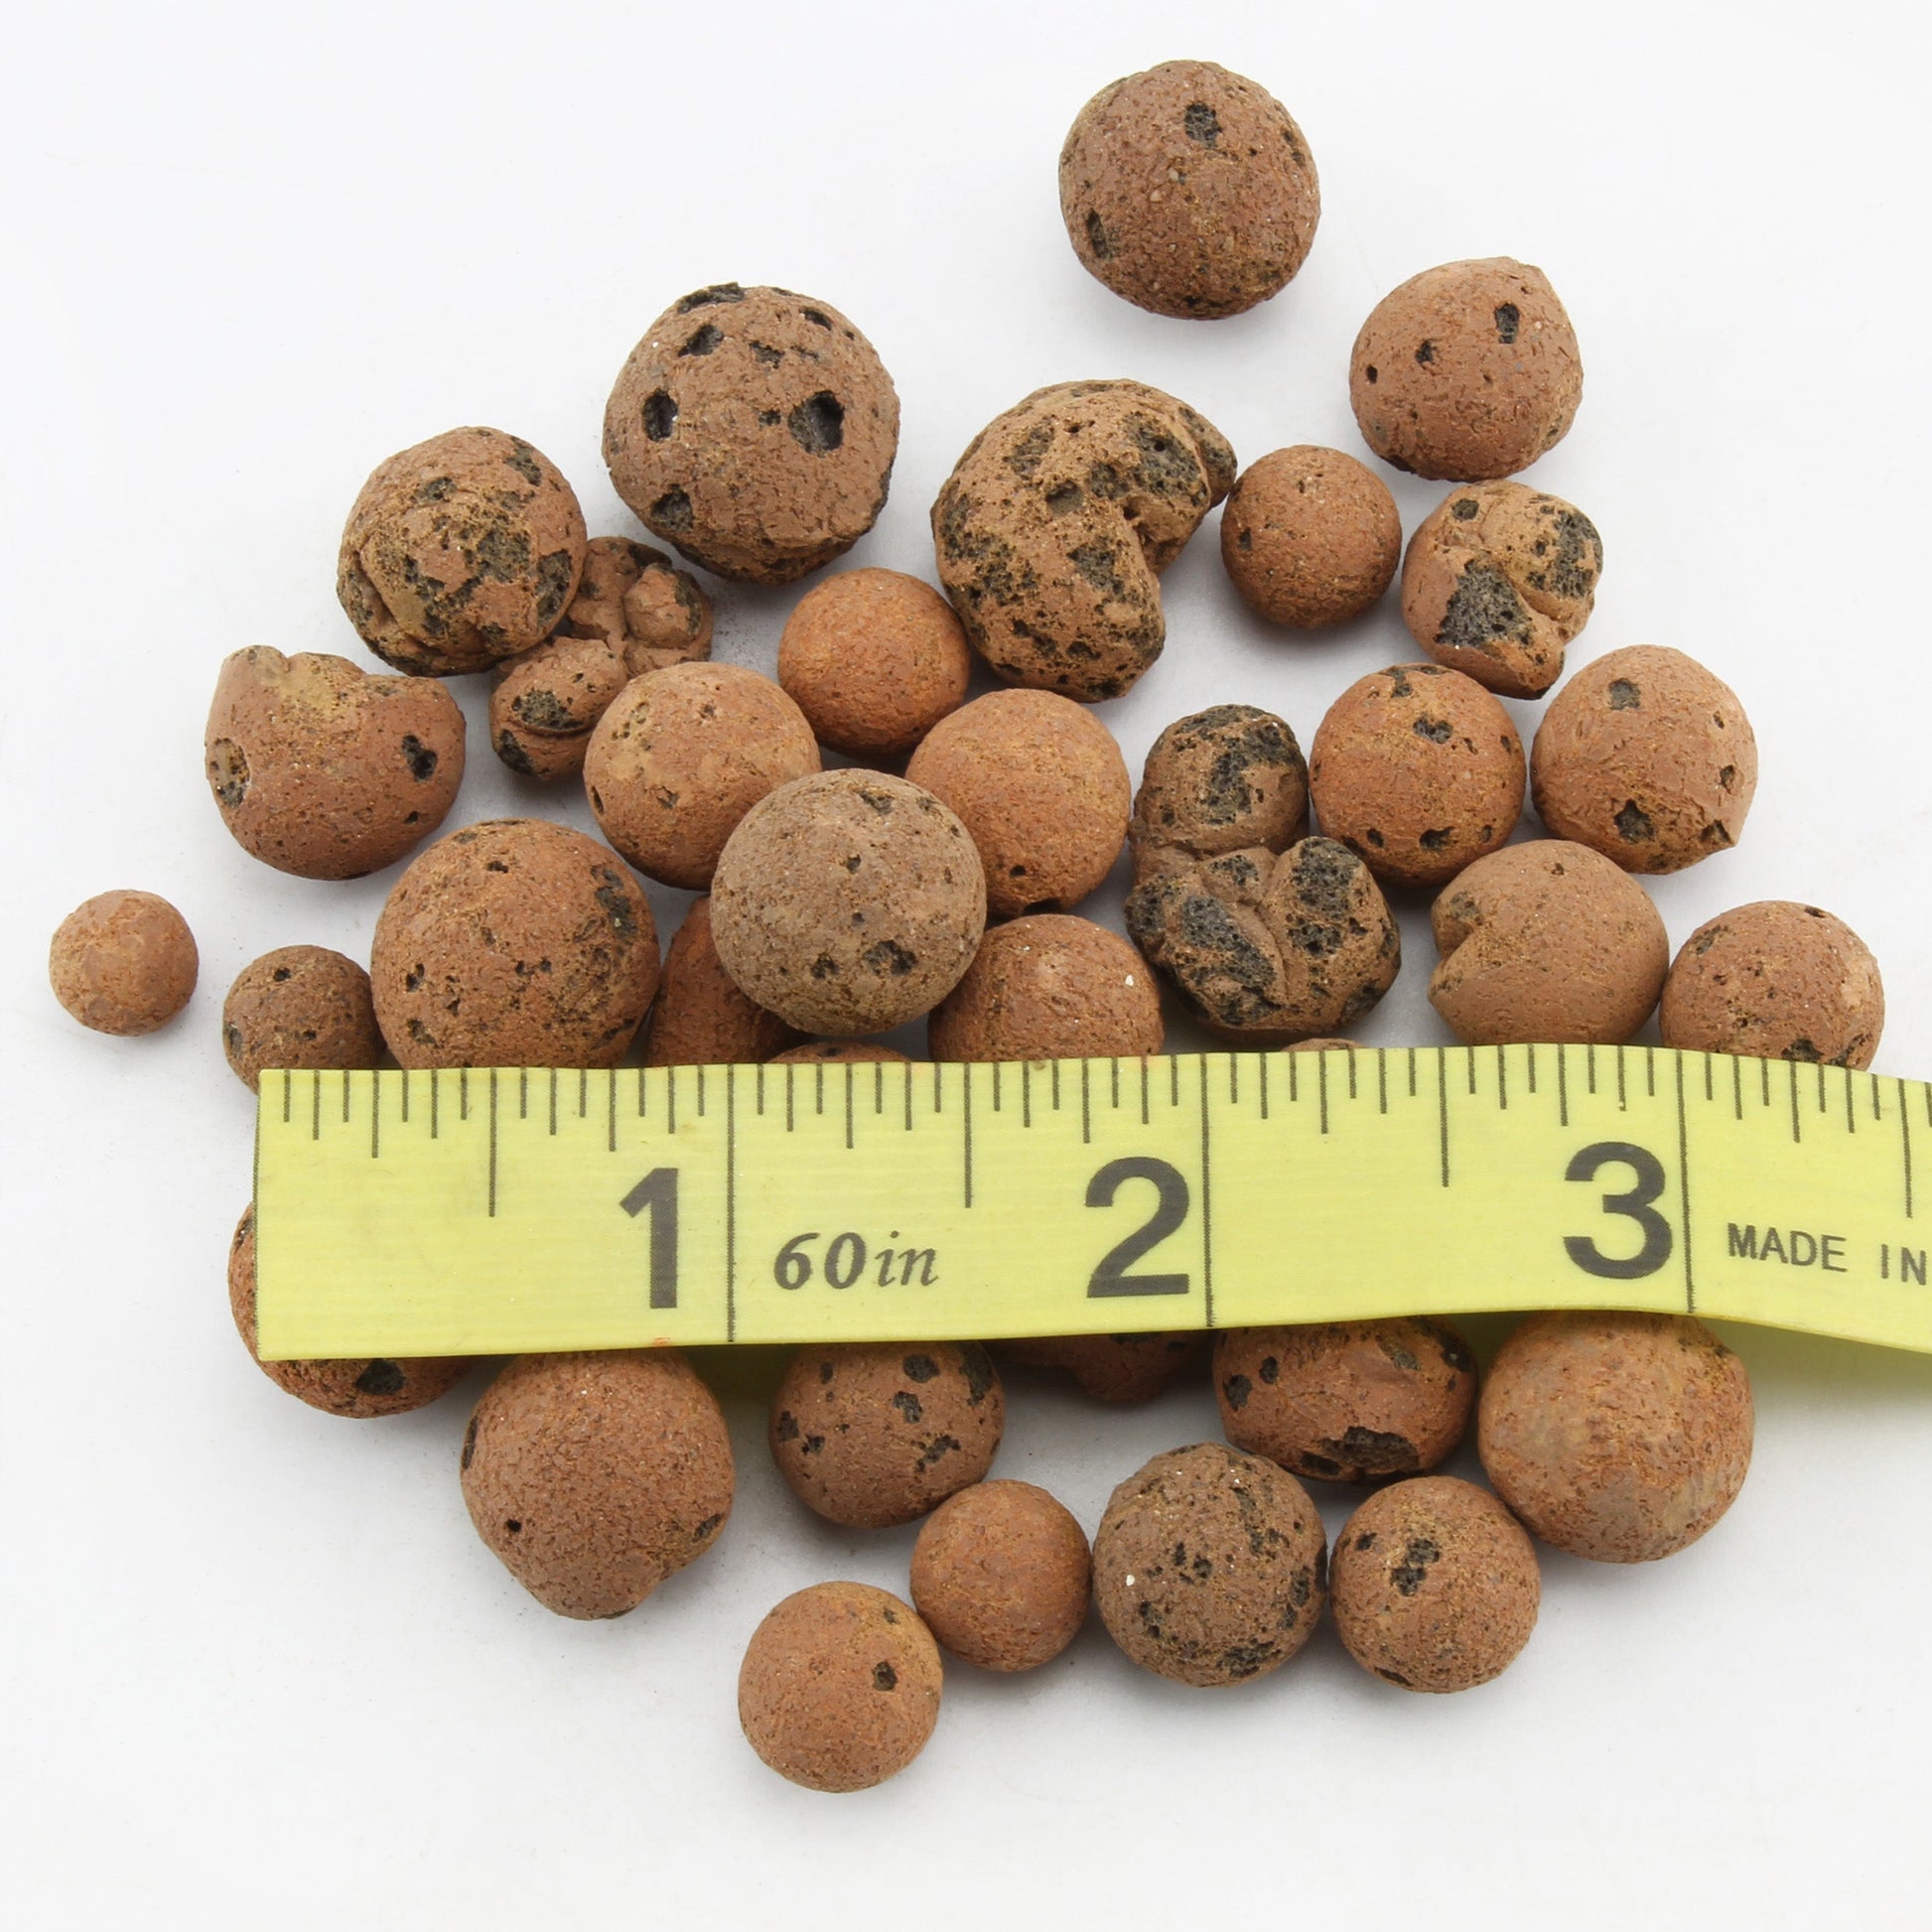 Expanded Hydroponic Clay Pebbles (2.5LB)